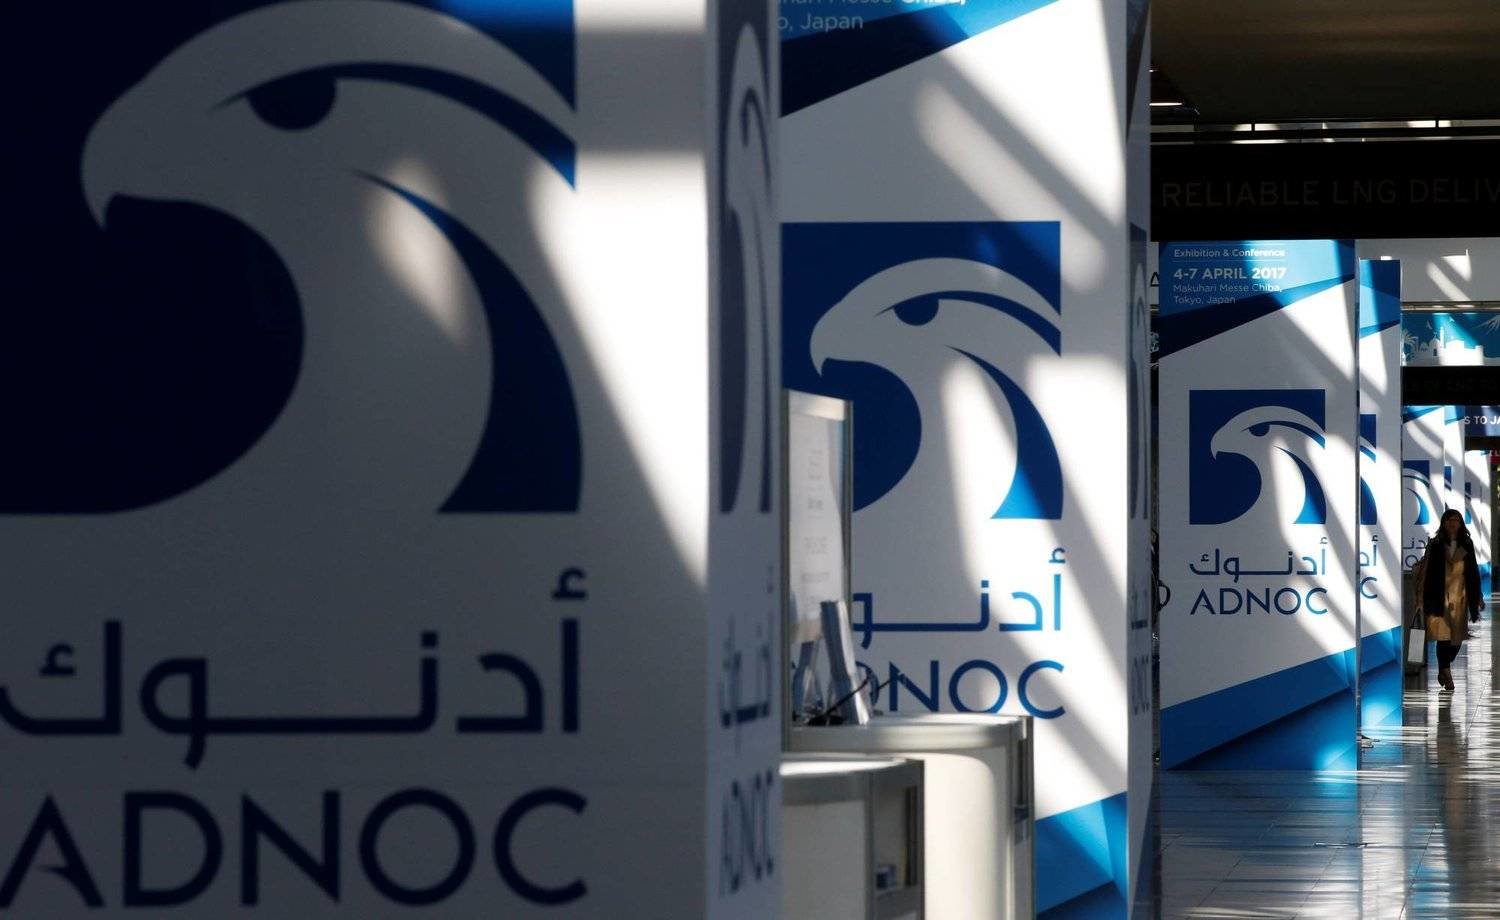 Logos of ADNOC are seen at Gastech, the world's biggest expo for the gas industry, in Chiba, Japan, April 4, 2017. REUTERS/Toru Hanai